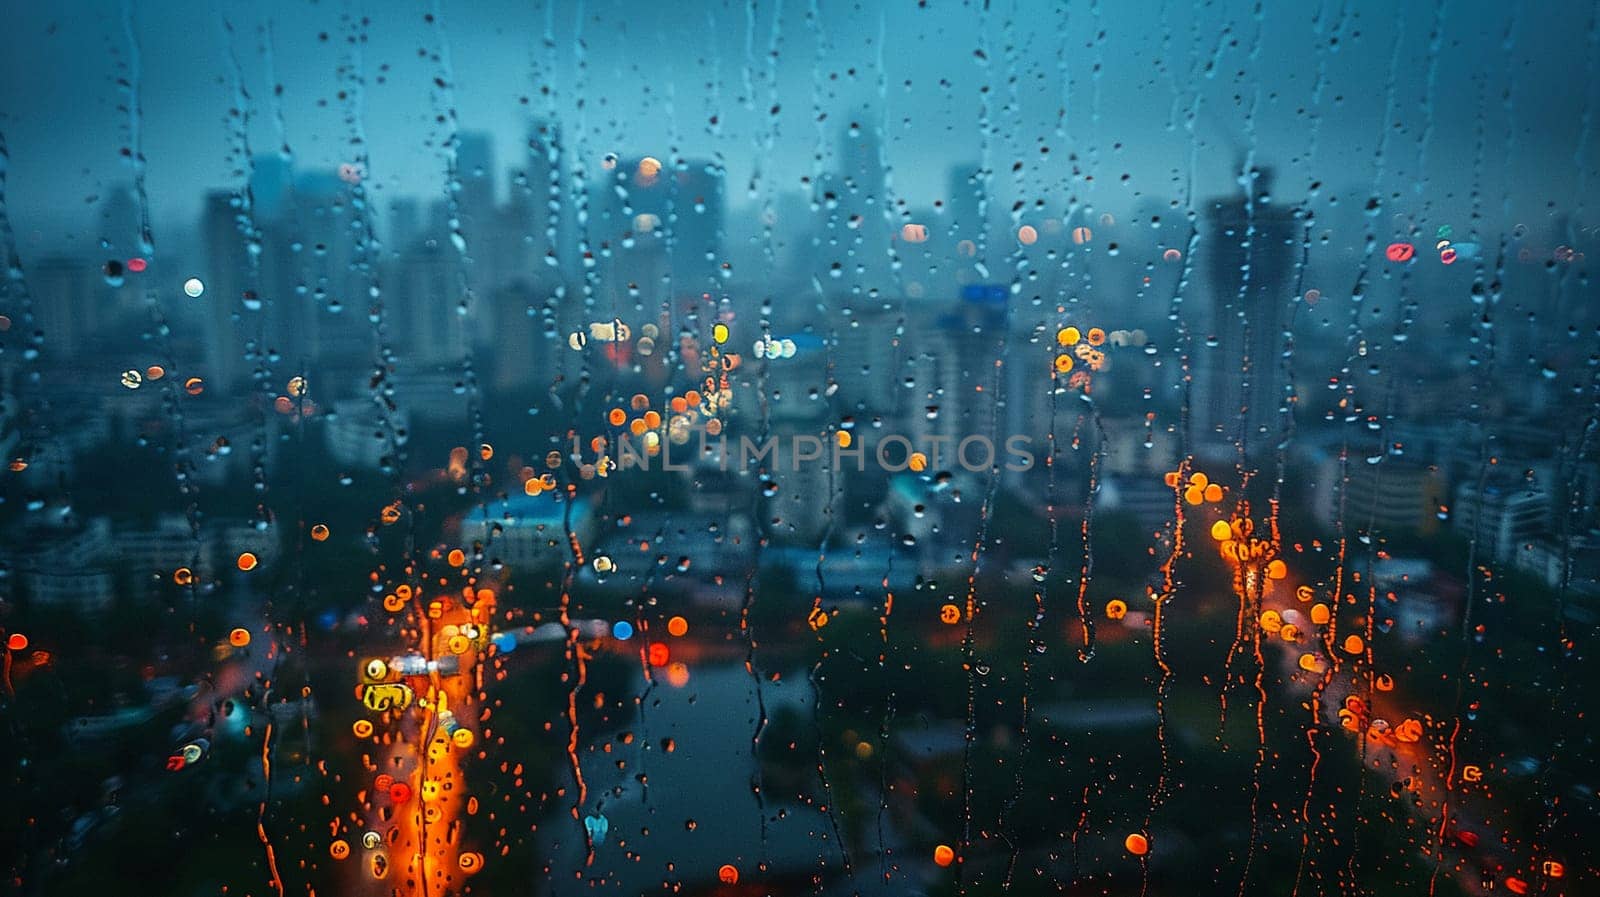 A cityscape seen through a rain-soaked window, creating a dreamy and abstract view.